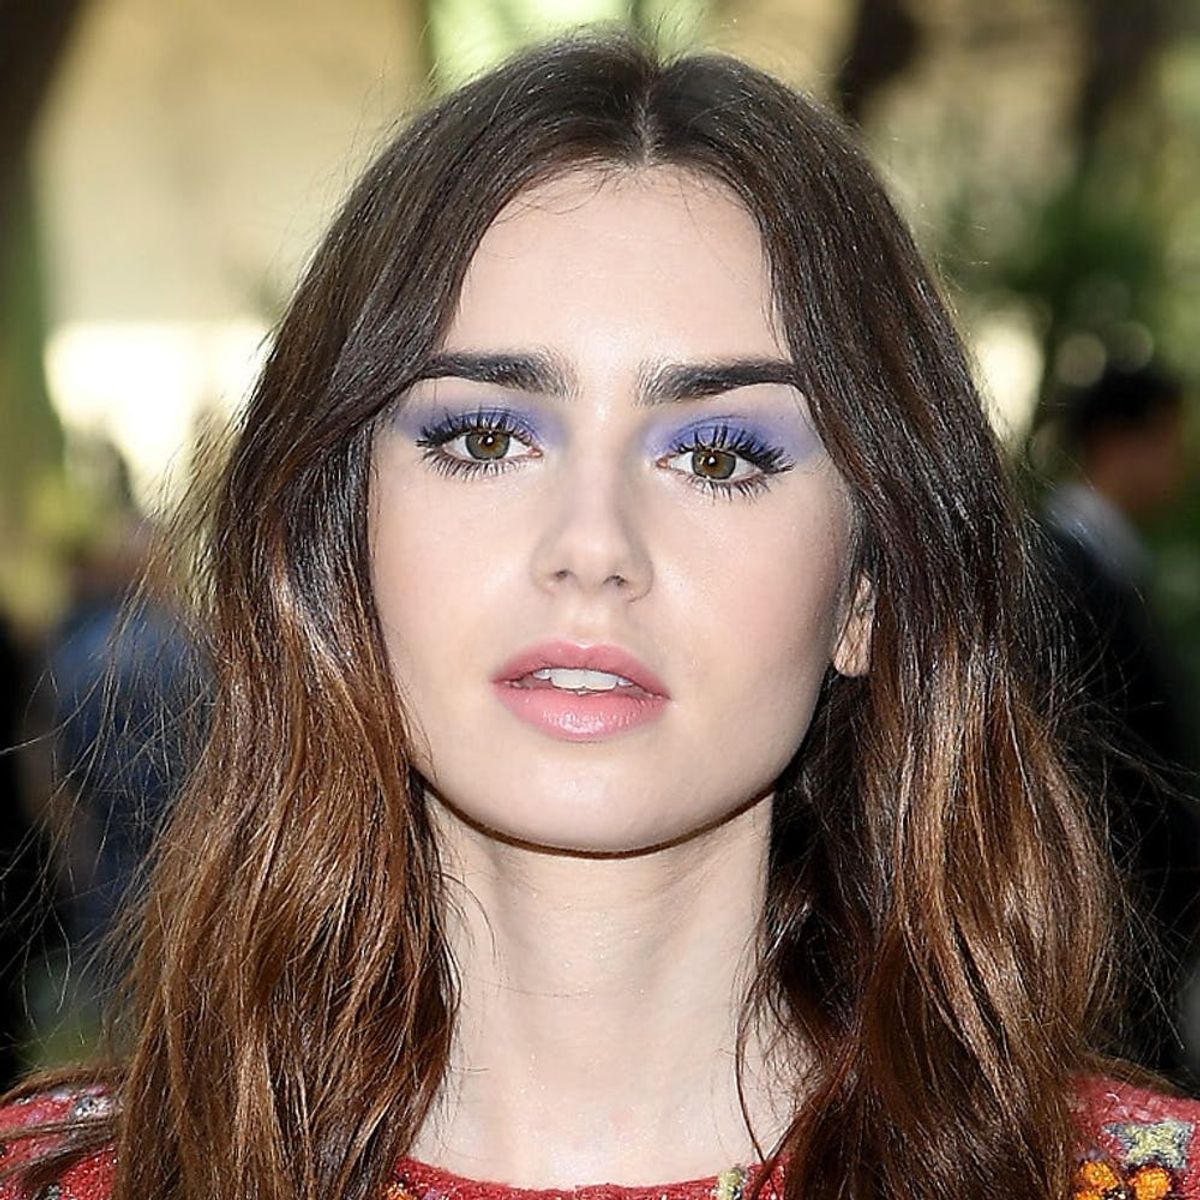 Lily Collins Has Something to Say About the Fashion Industry’s Sizing Standards